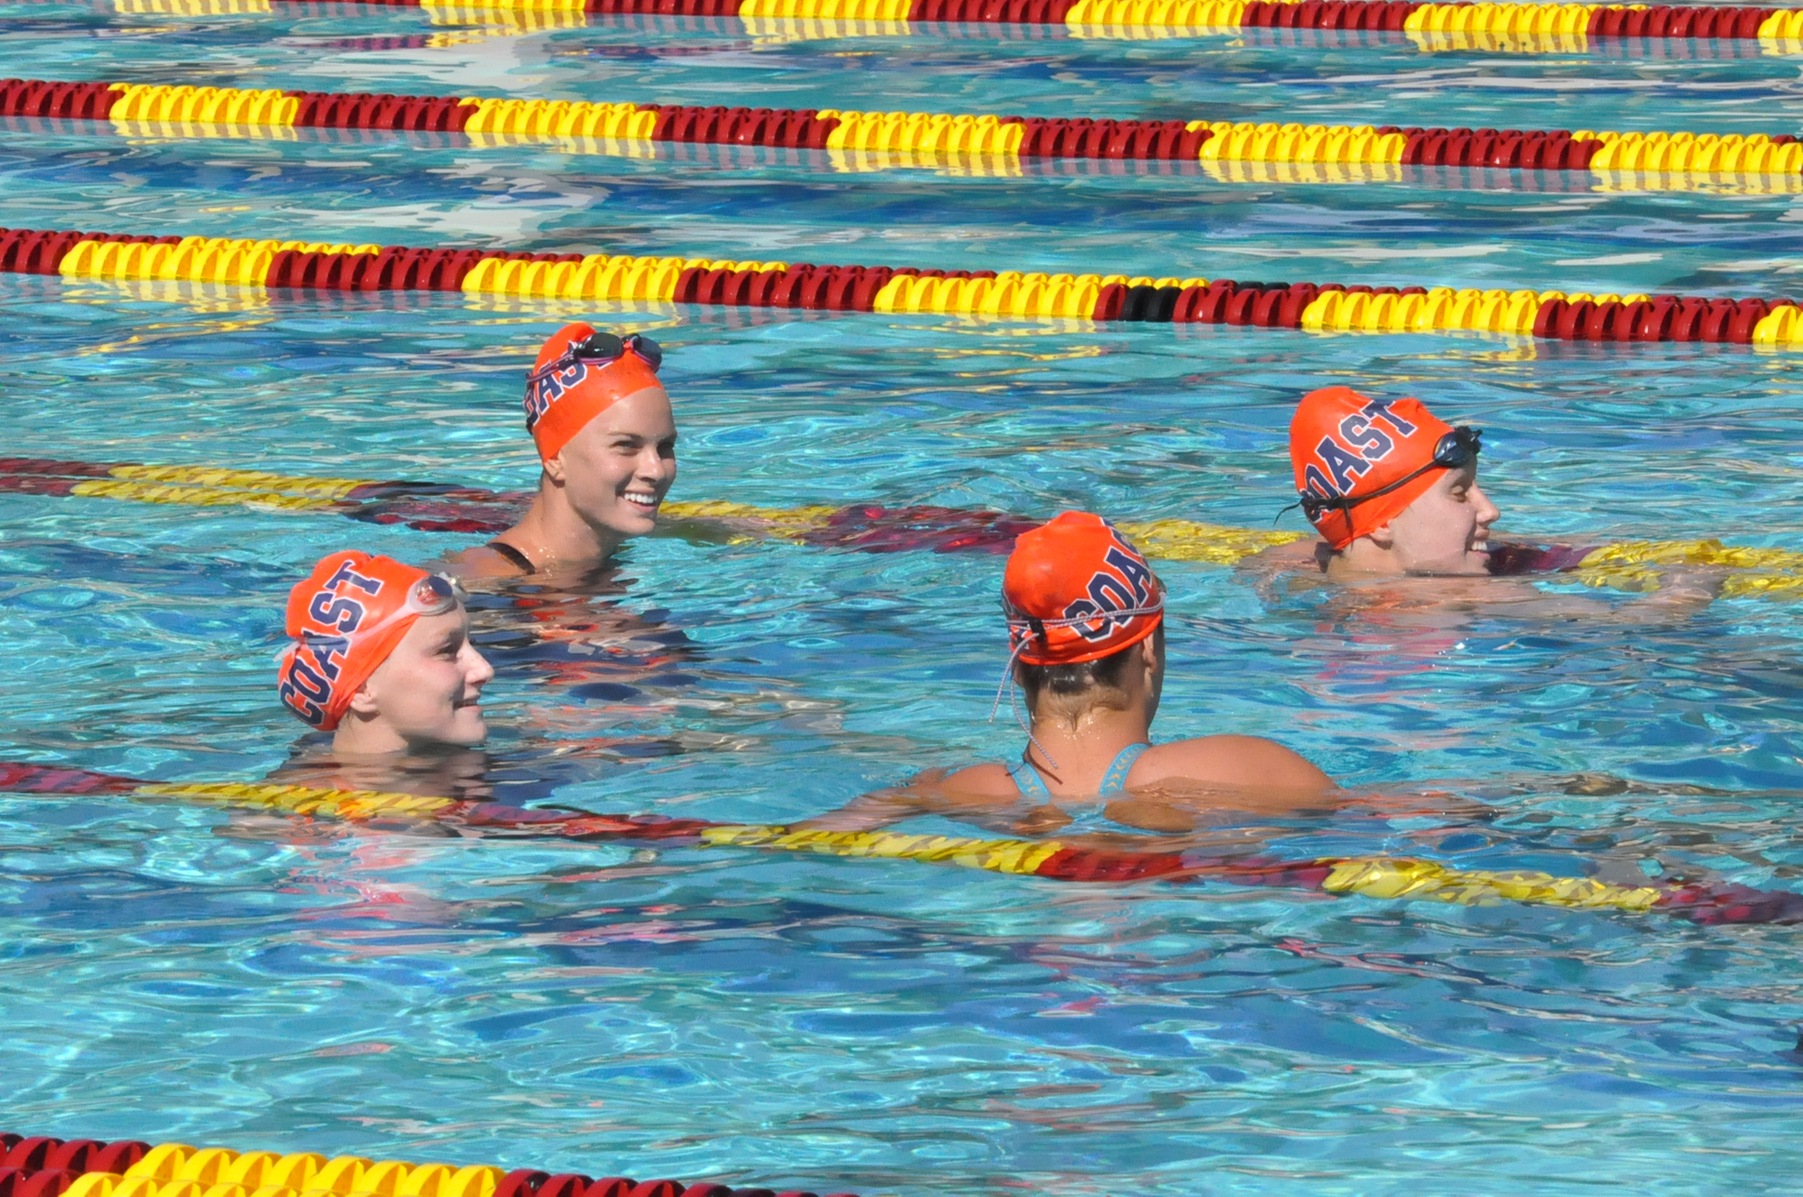 Pirates maintain lead after Day 2 of State Meet